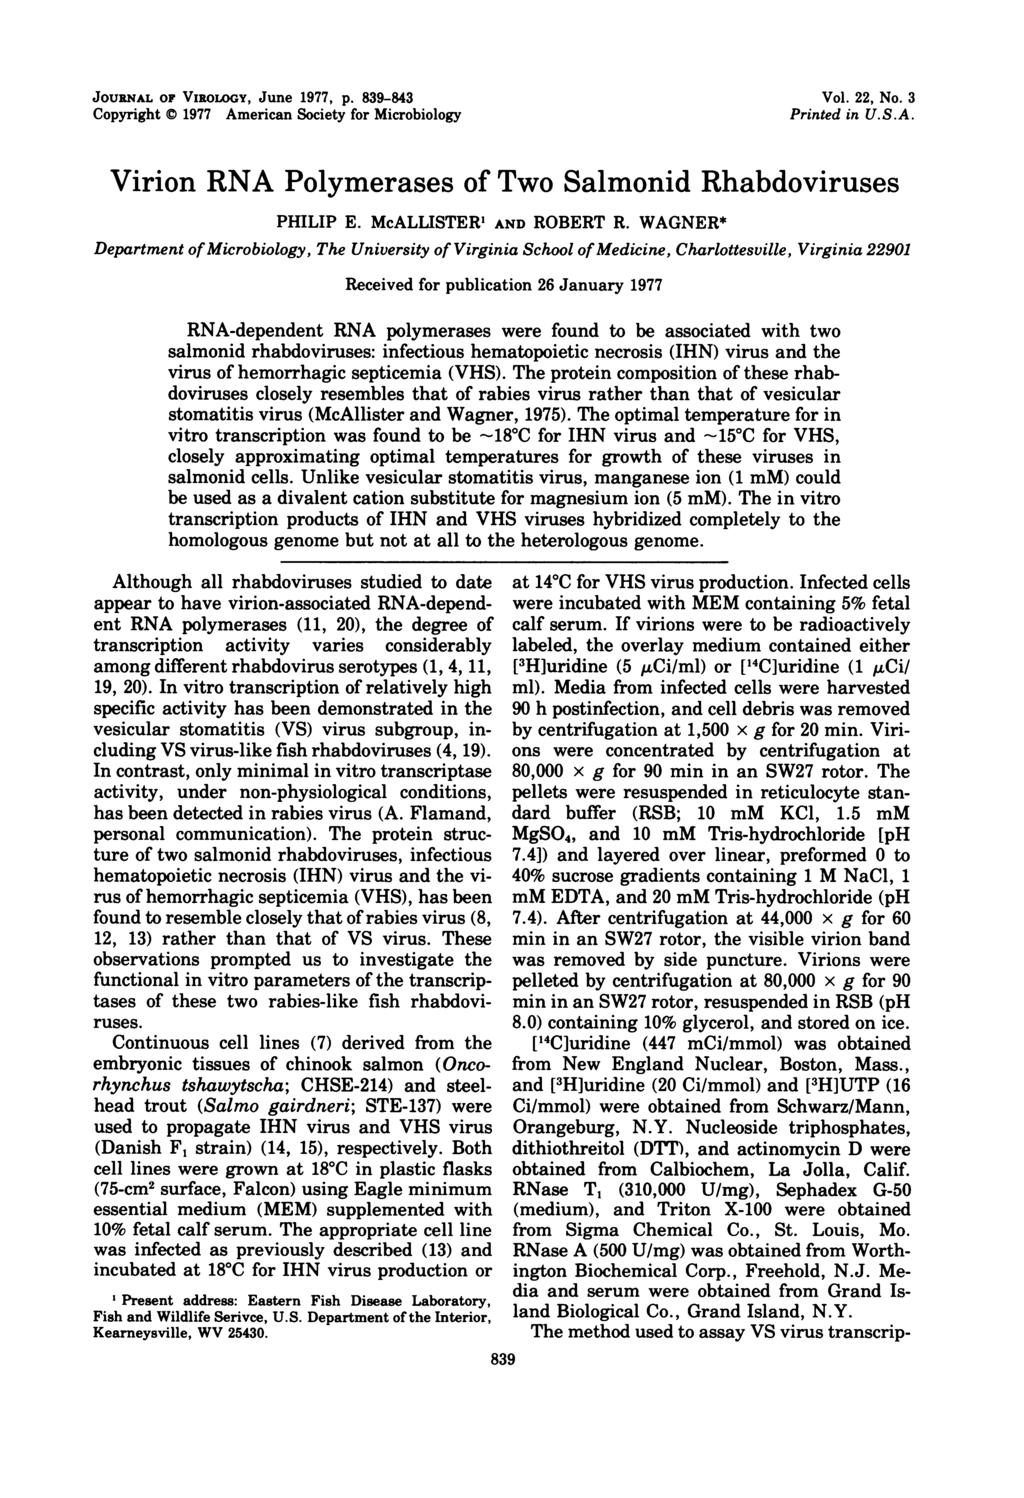 JOURNAL OF VIROLOGY, June 1977, p. 839-843 Copyright C 1977 American Society for Microbiology Vol. 22, No. 3 Printed in U.S.A. Virion RNA Polymerases of Two Salmonid Rhabdoviruses PHILIP E.